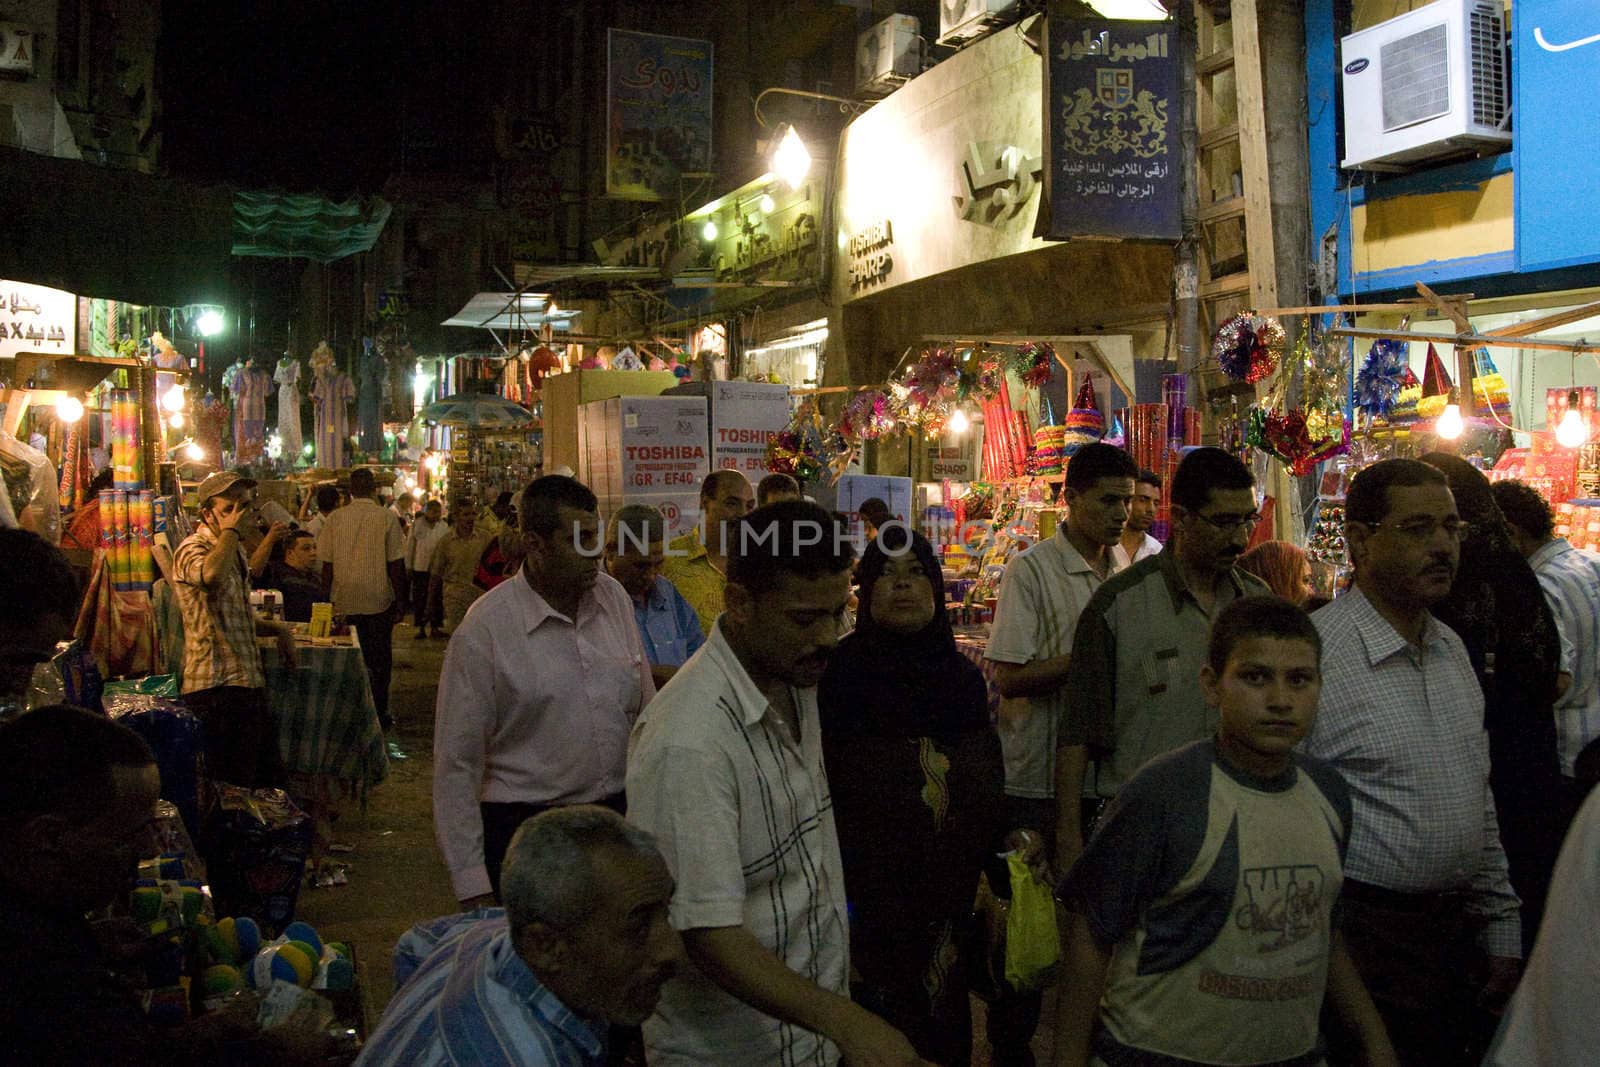 Egypt - We take a closer look at Cairo's Khan El-Khalili Bazaar life on MAY 31, 2008, as this shopping area dates back to 1382.